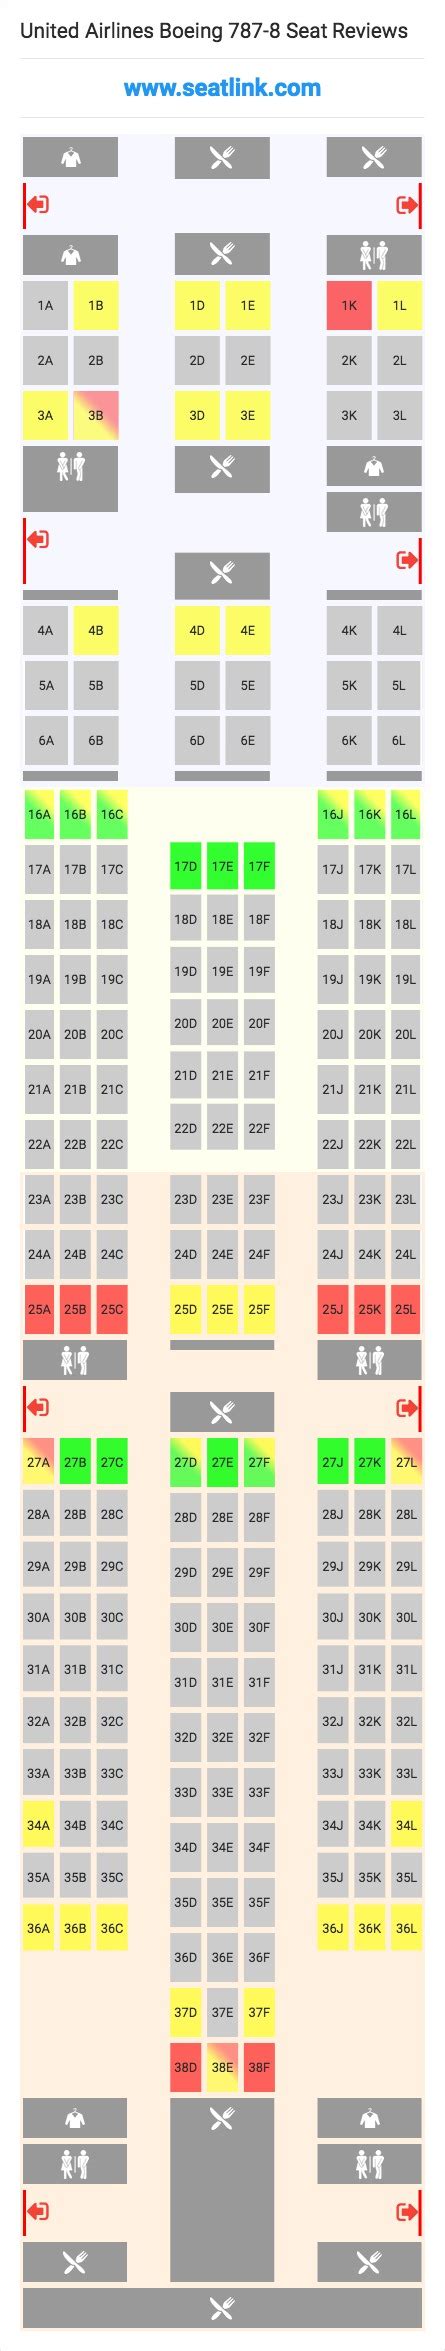 American Airlines Seating Chart 788